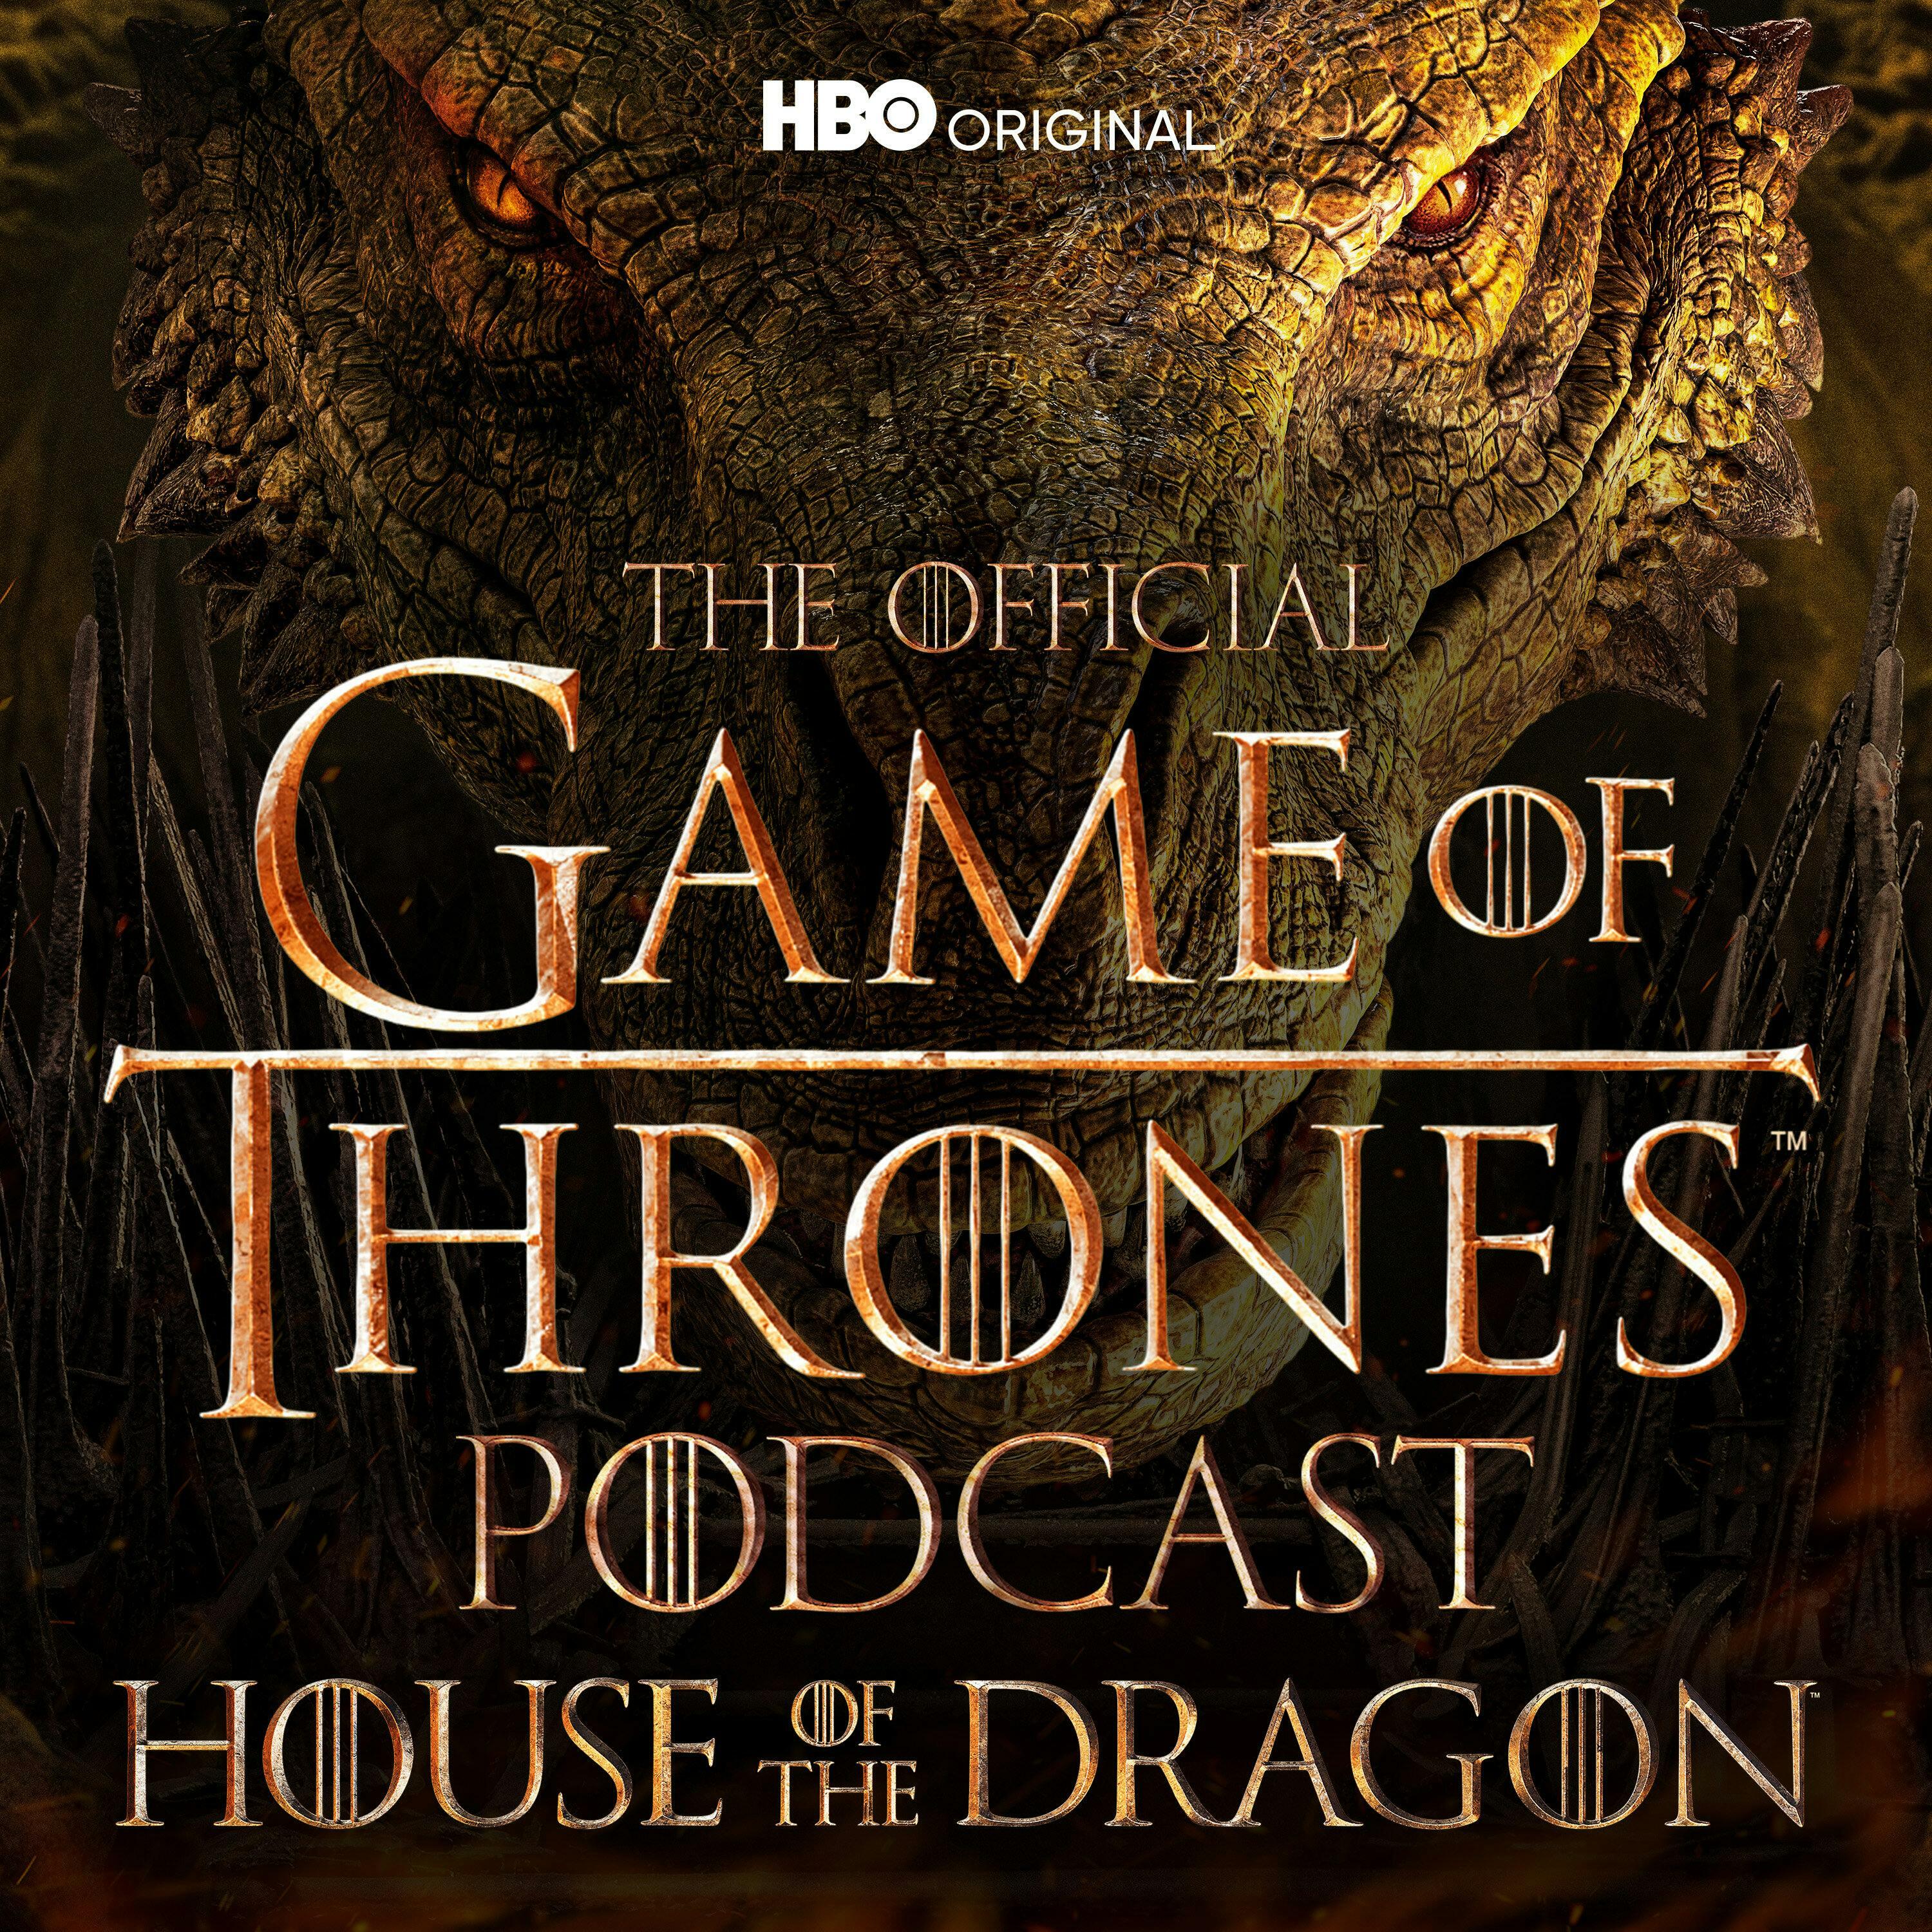 5 Biggest Events in 'House of the Dragon' Episode 2, 'The Rogue